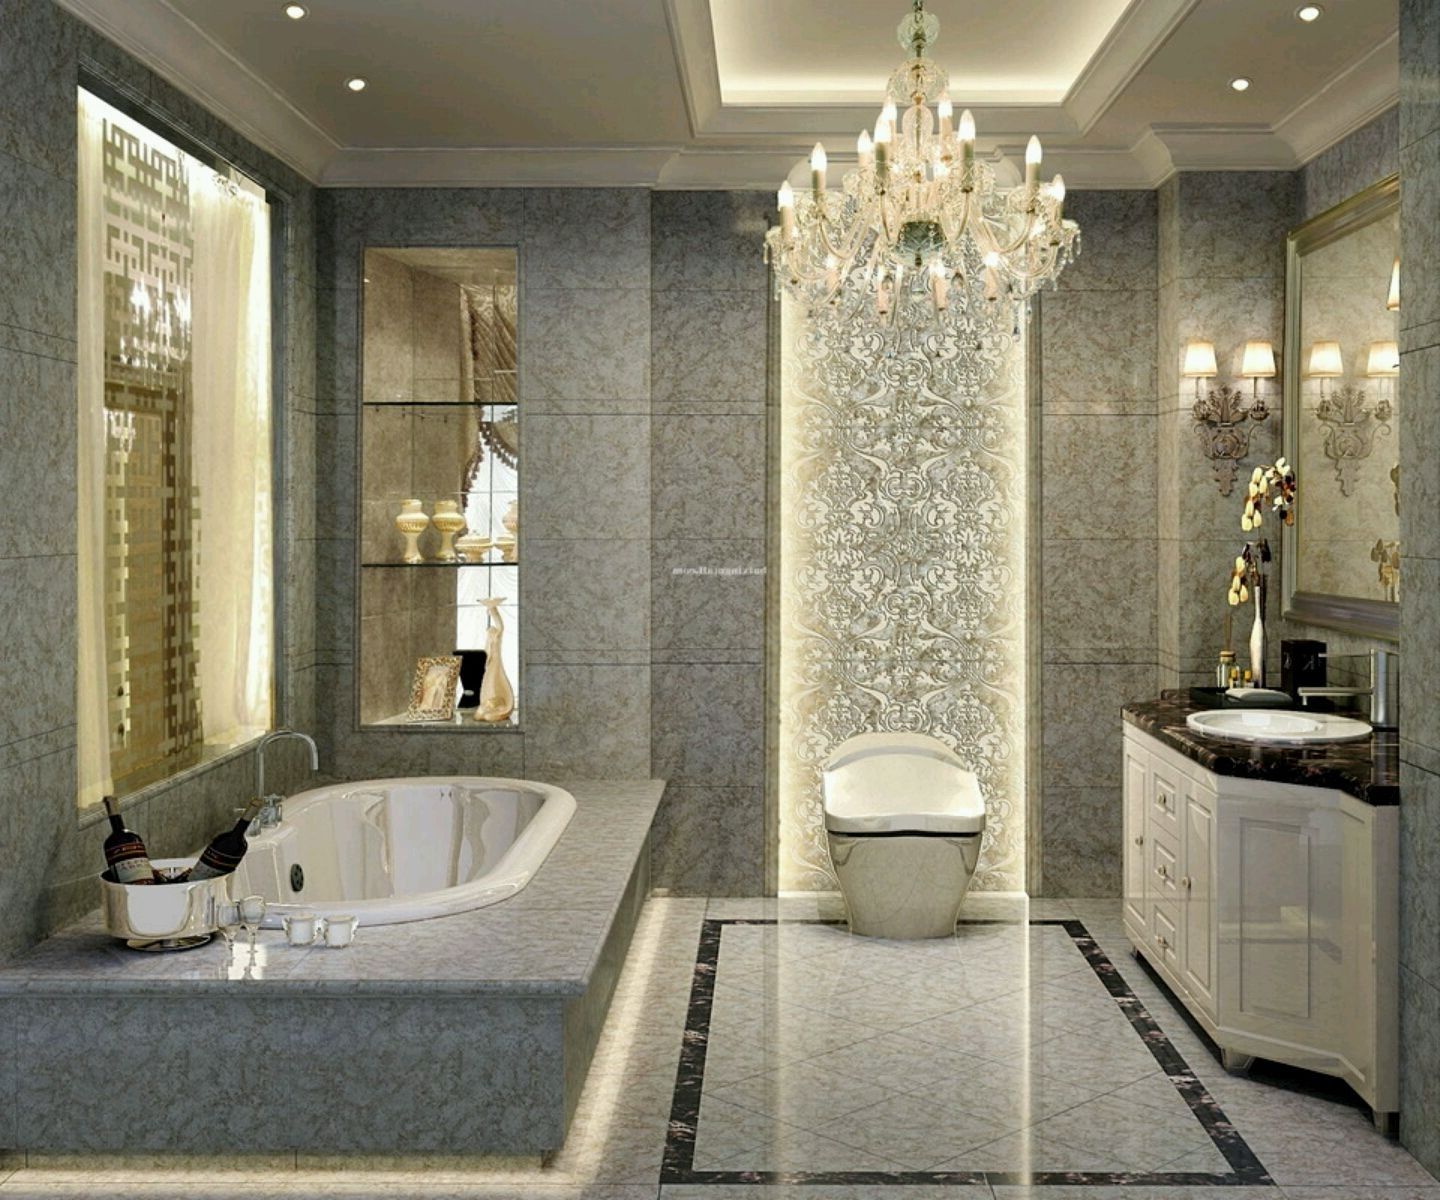 Chandelier For Bathroom Home Design Ideas Throughout Chandelier In The Bathroom (Photo 7 of 12)